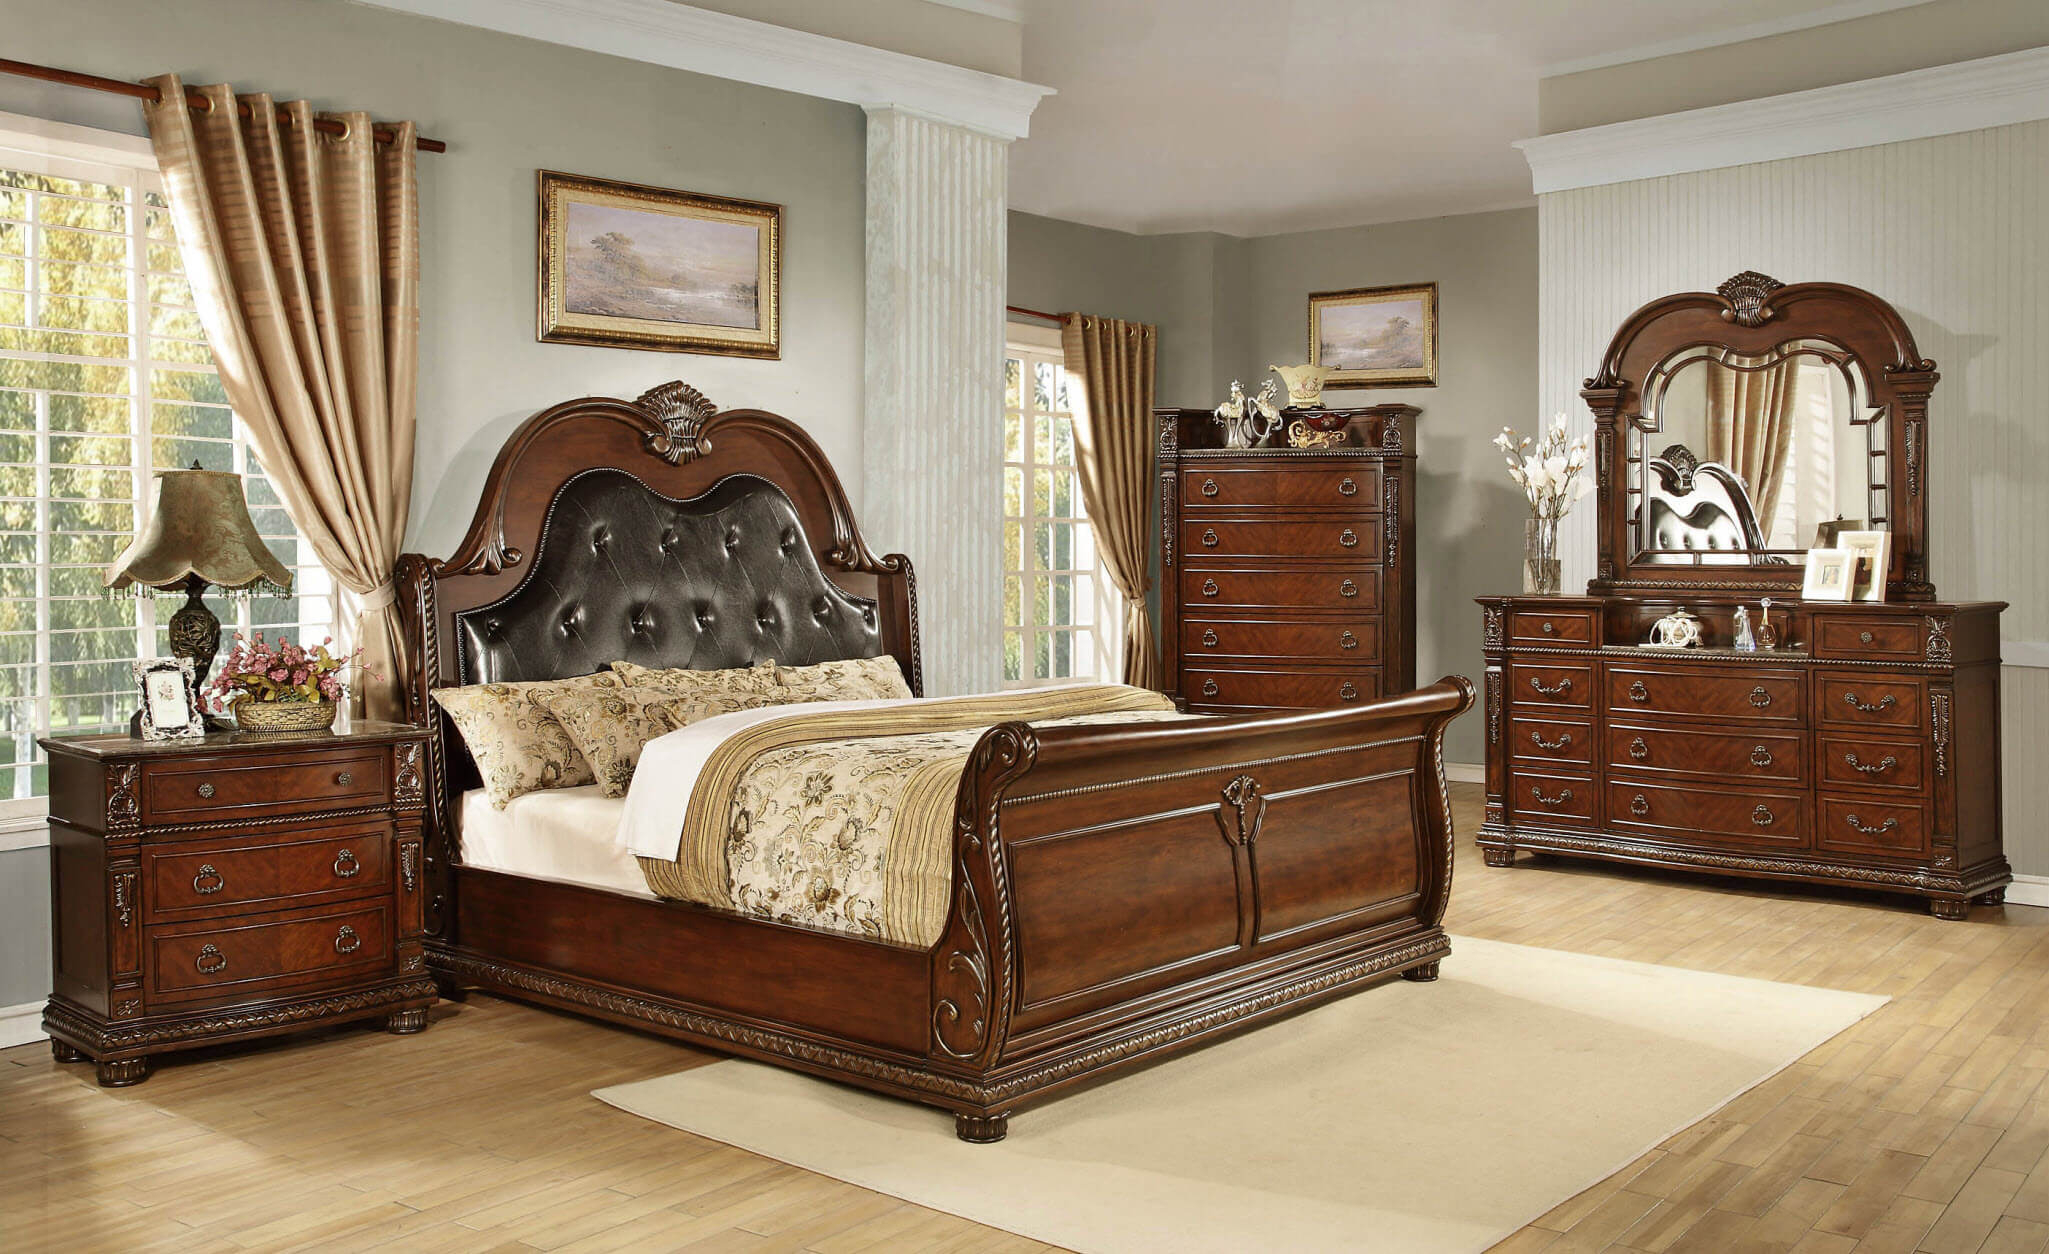 B718 Palace Marble Top Bedroom Set Global Trading inside size 2049 X 1254